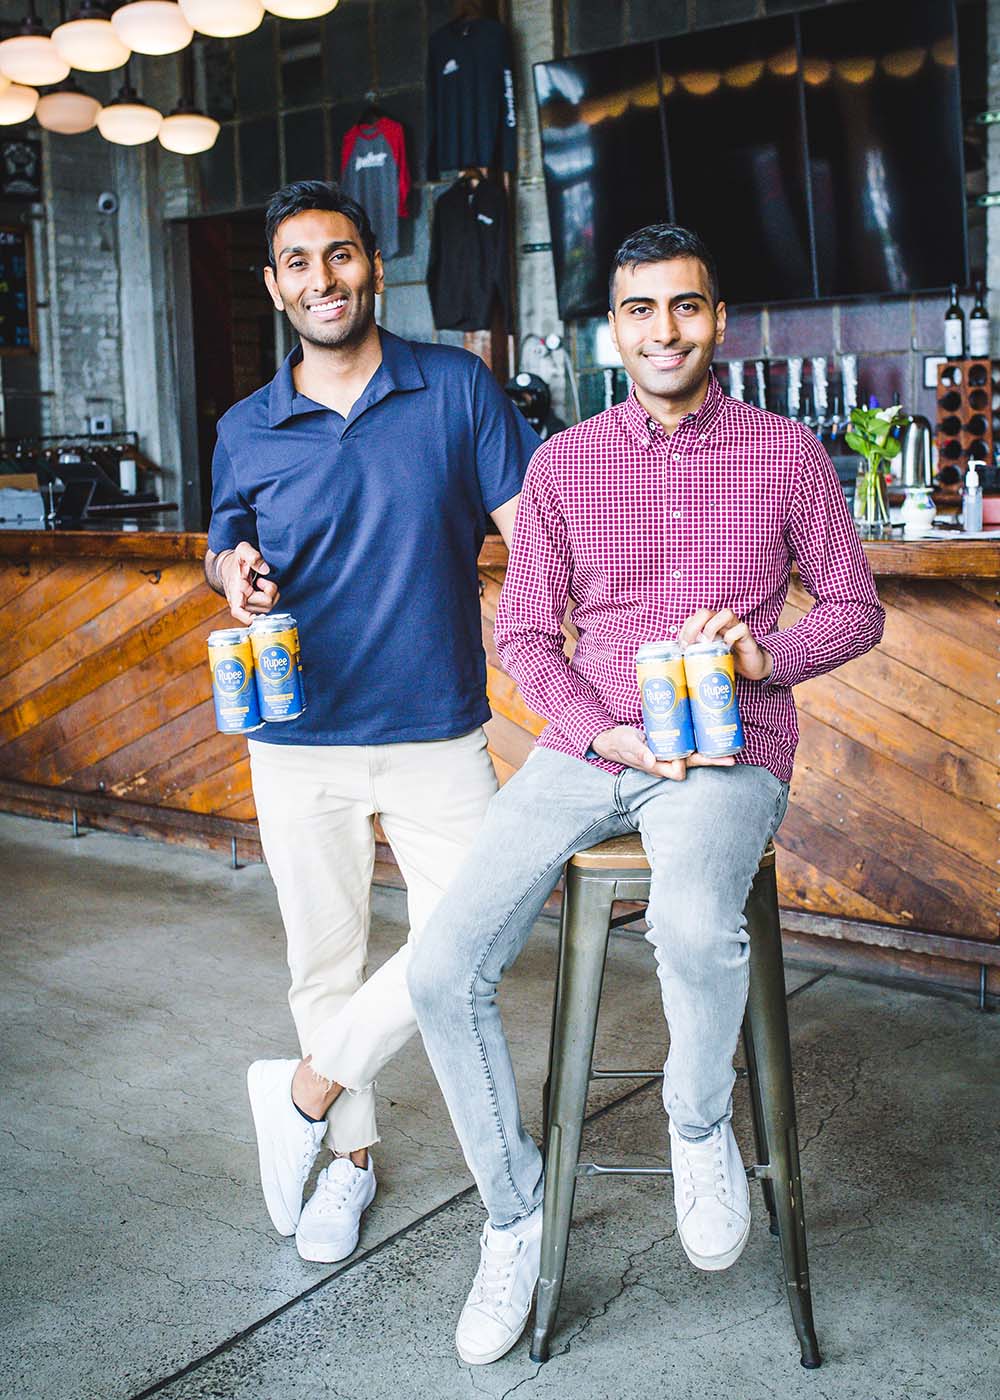 Photo of Sumit Sharma (right, in red) and his brother Vanit Sharma (at left, in blue) posing with four packs of Rupee beer at Dorchester Brewing Company. The brothers are Indian American, have dark hair, and smile as they pose. Sumit sits on a metal stool and Vanit stands. A wooden bar and taps are seen behind them.